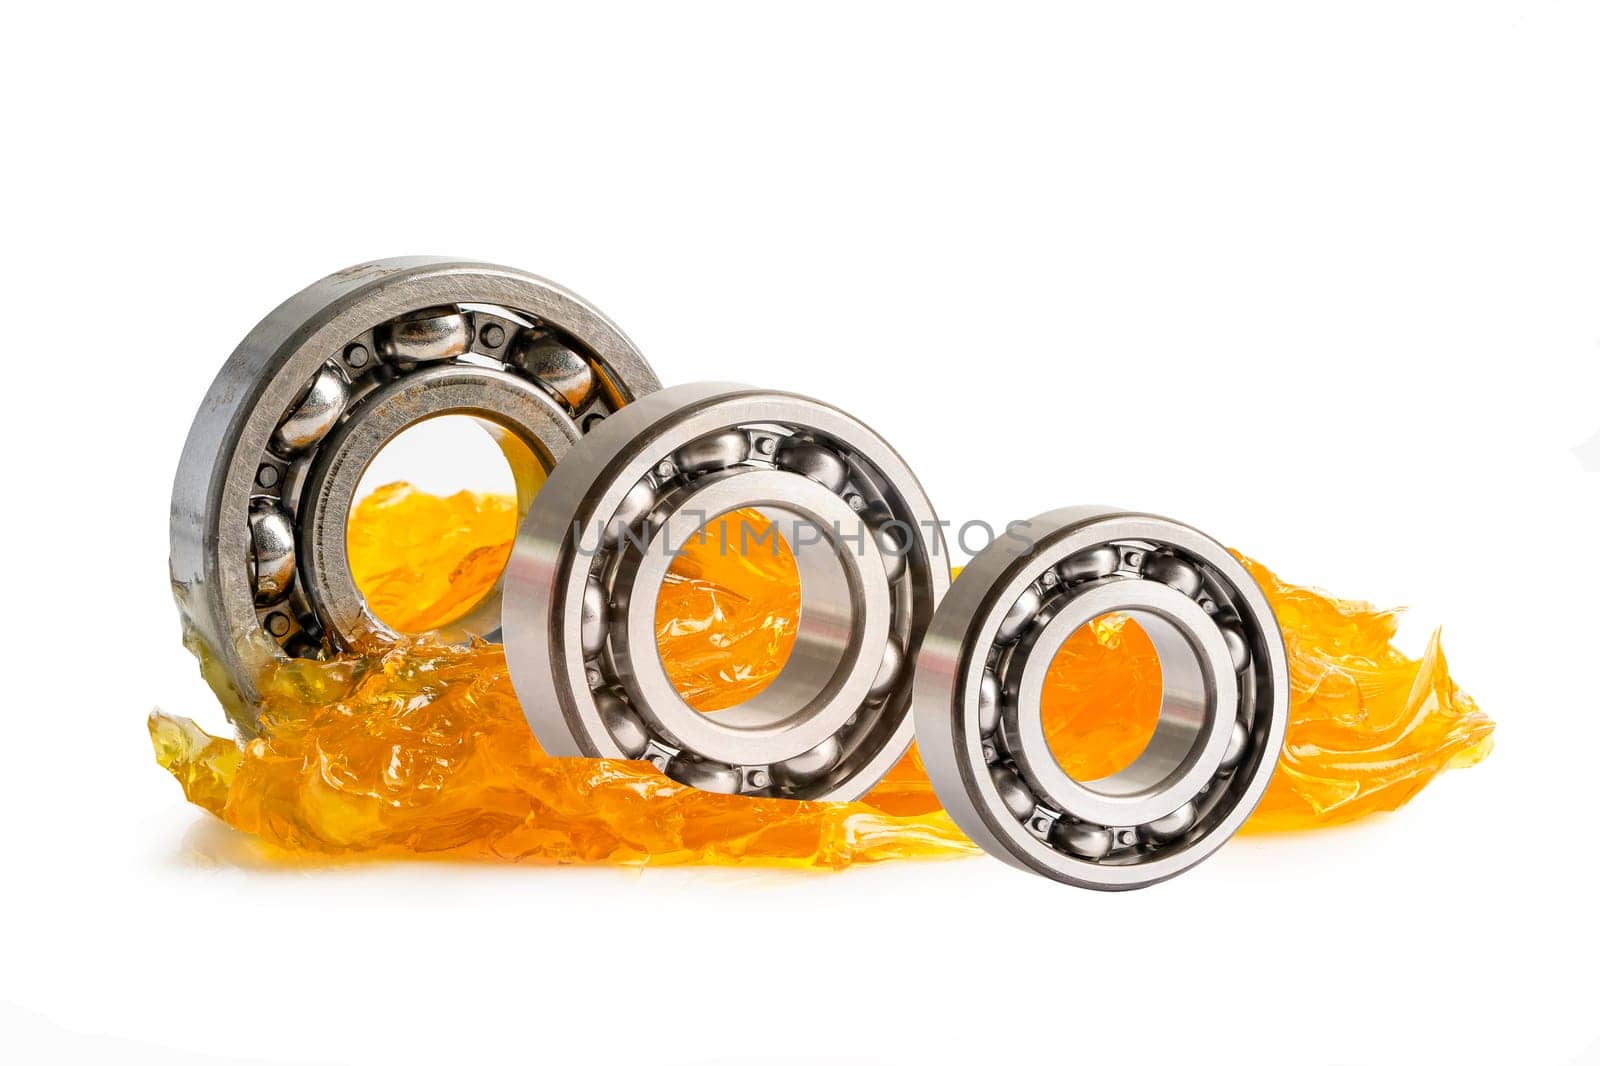 Ball bearing stainless with grease lithium machinery lubrication for automotive and industrial. by pamai